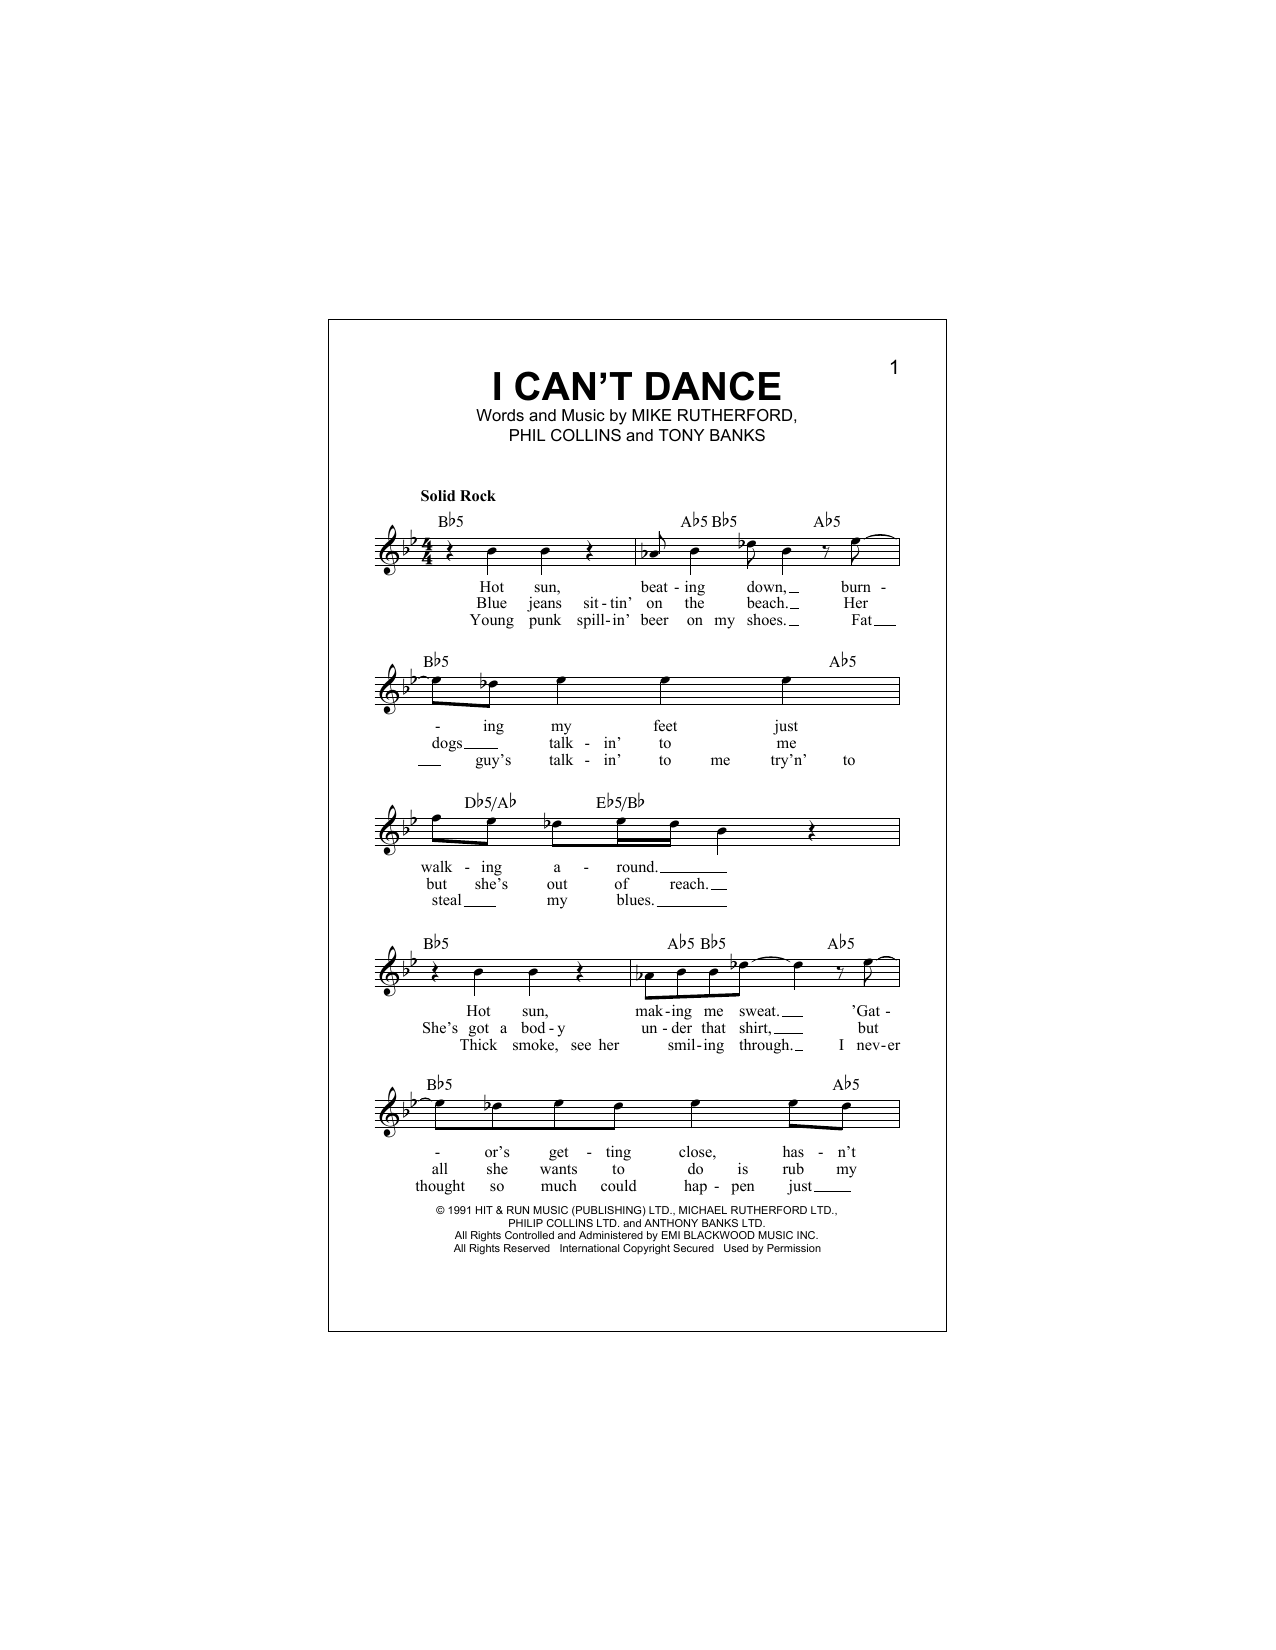 Genesis I Can't Dance sheet music notes and chords. Download Printable PDF.